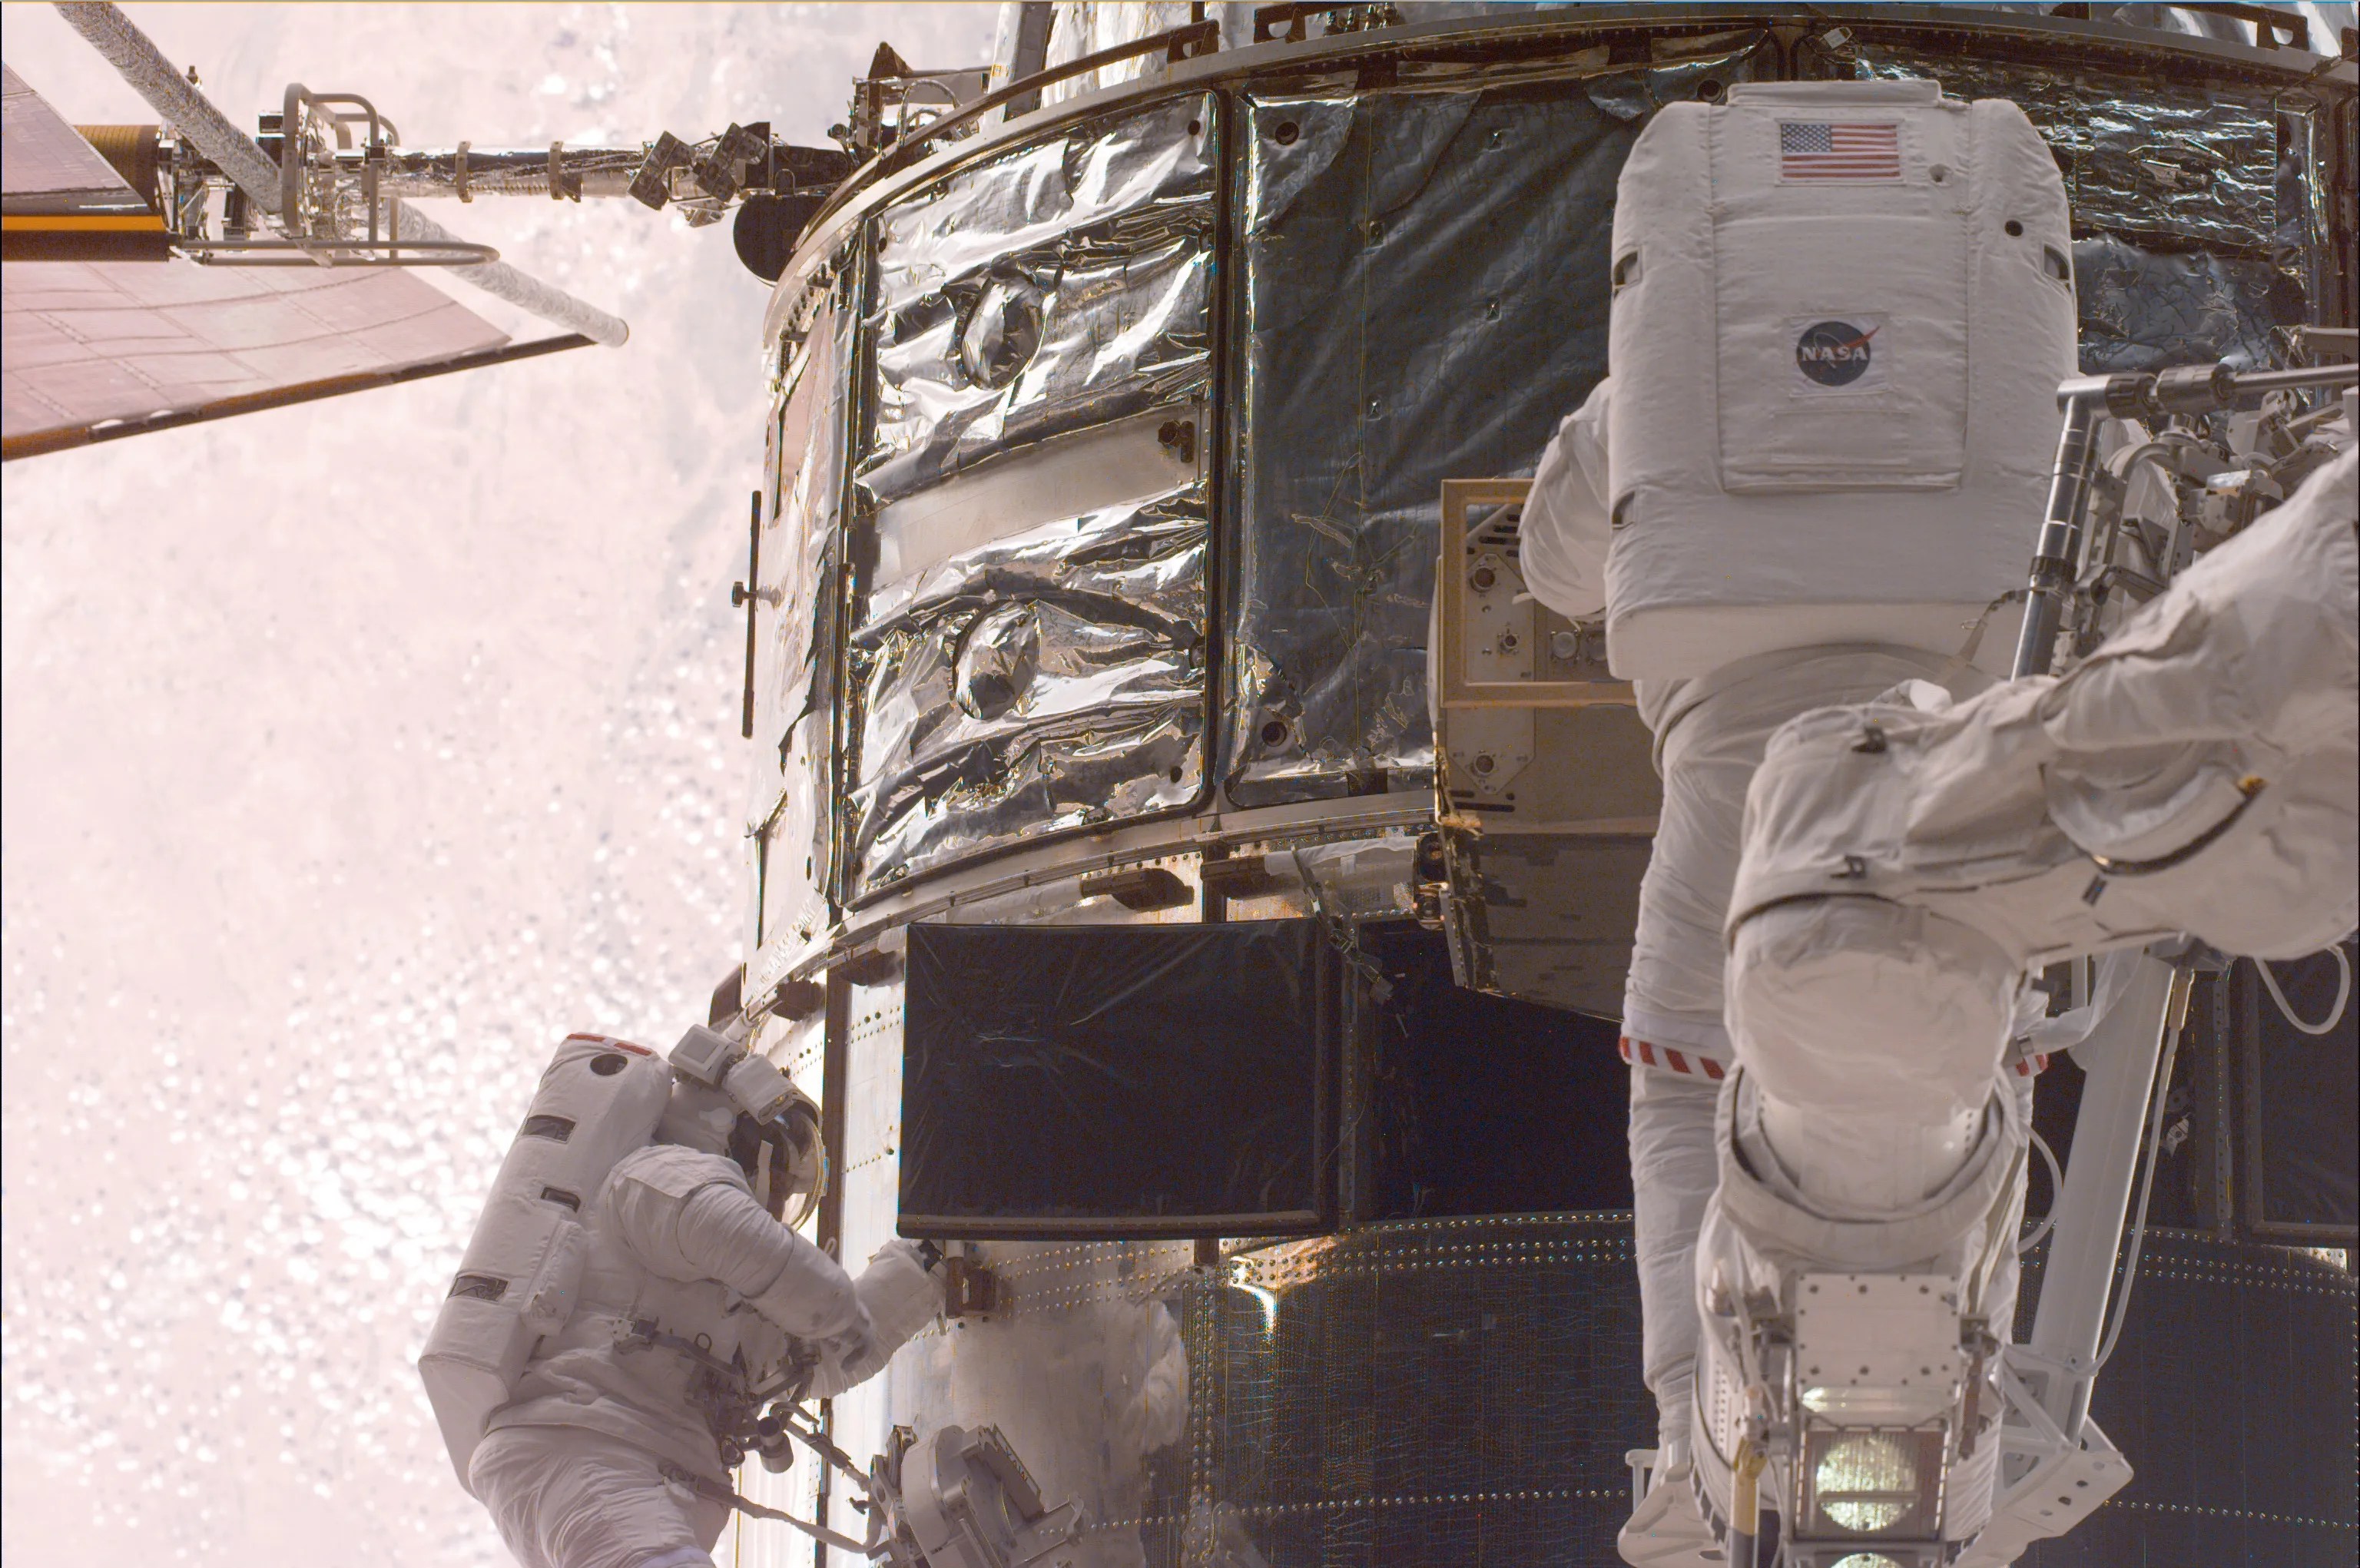 A close-up view of two astronauts servicing Hubble, one tethered to the telescope on the left and one attached to a robotic arm in the center. The ground below on Earth takes up the entire background.